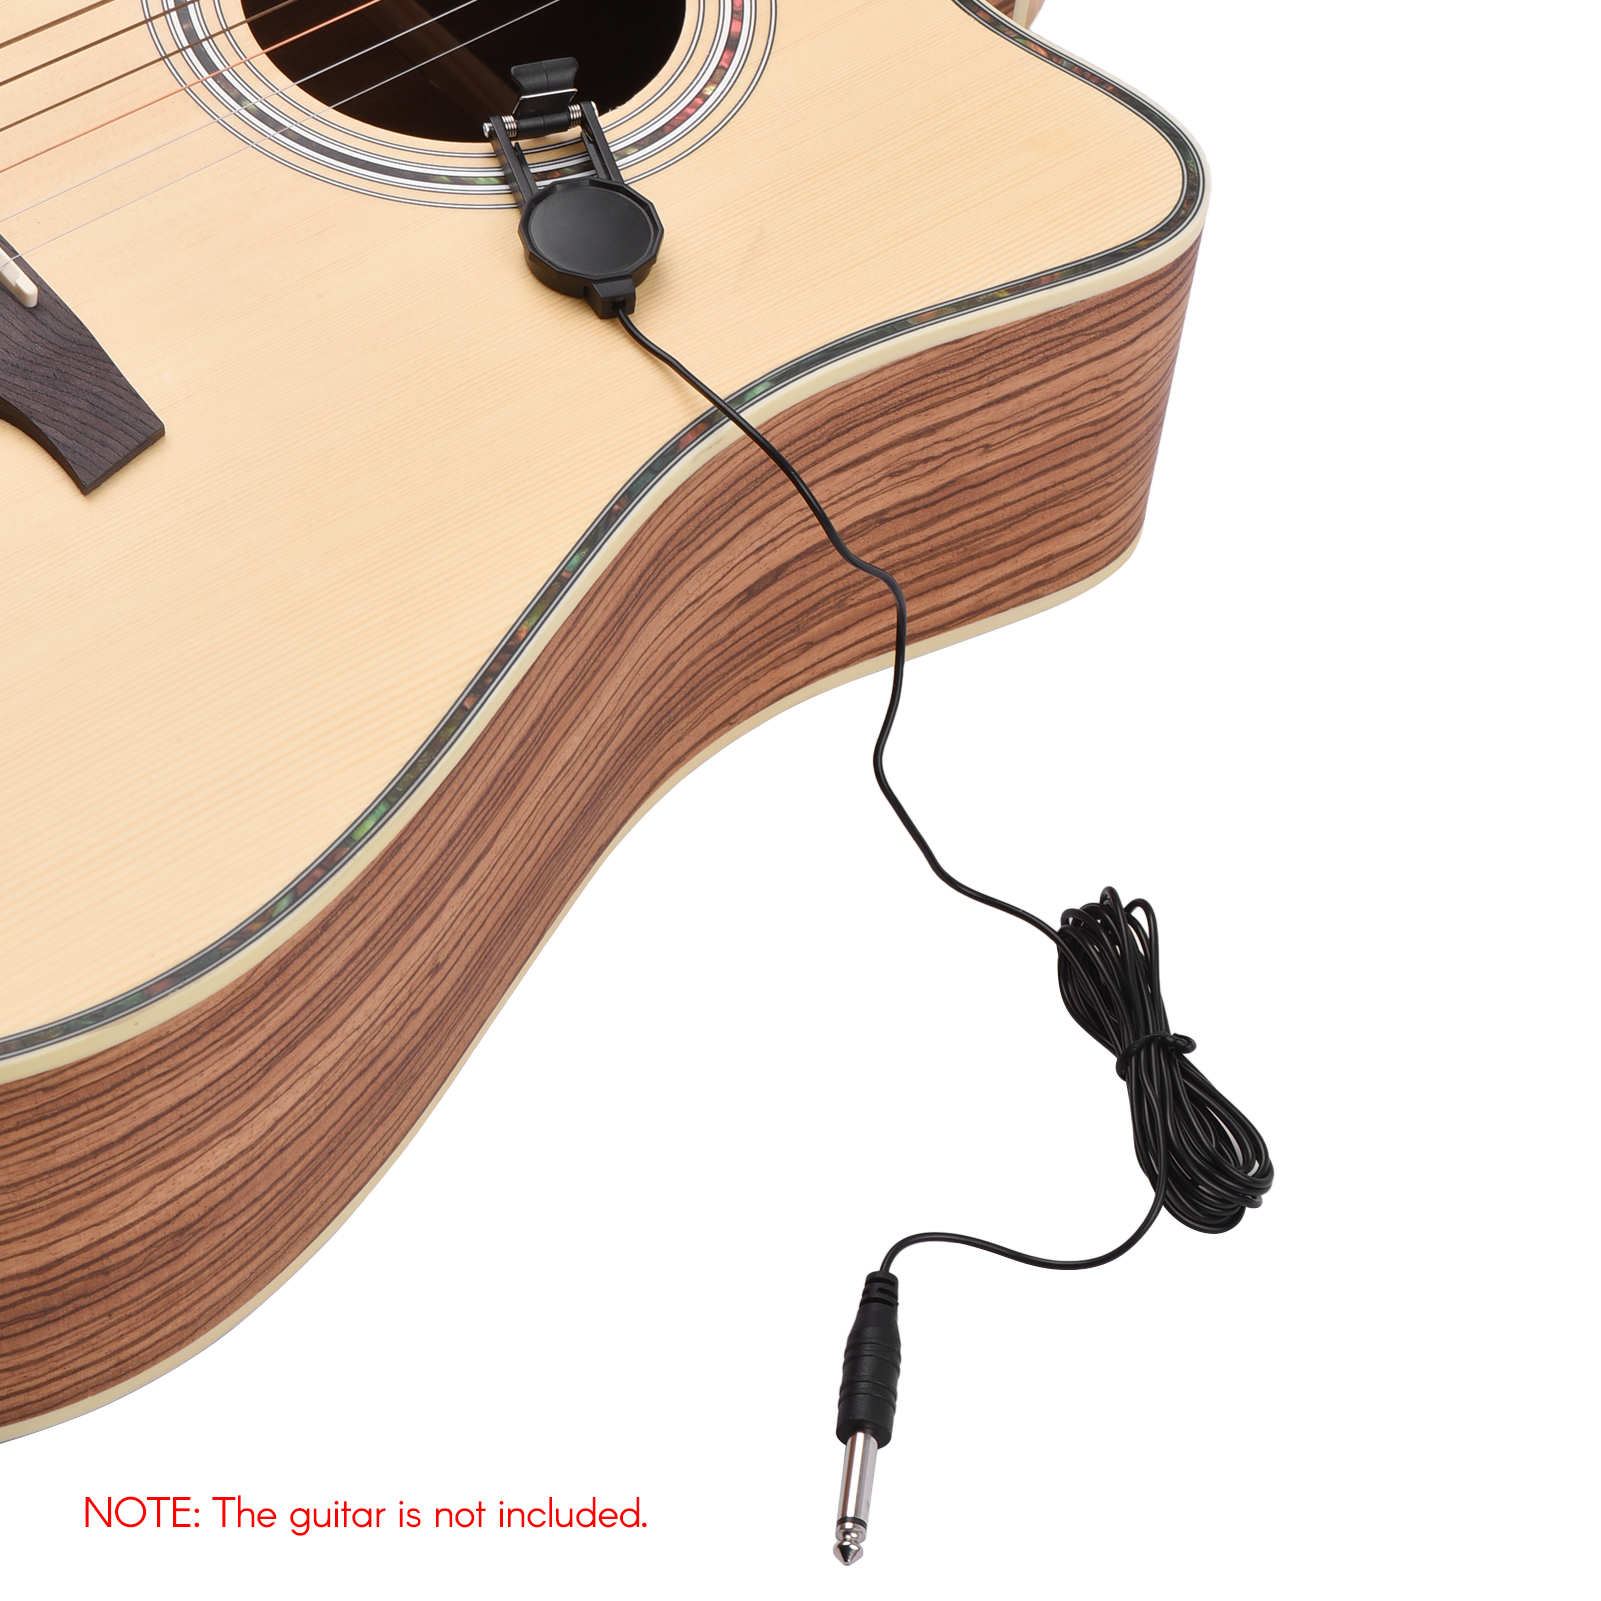 Clip-on Instrument Pickup Guitar Pick-up Mini Transducer with 1/4 Inch Connector 2.4M Cable for Acoustic Guitar Violin Mandolin Ukulele